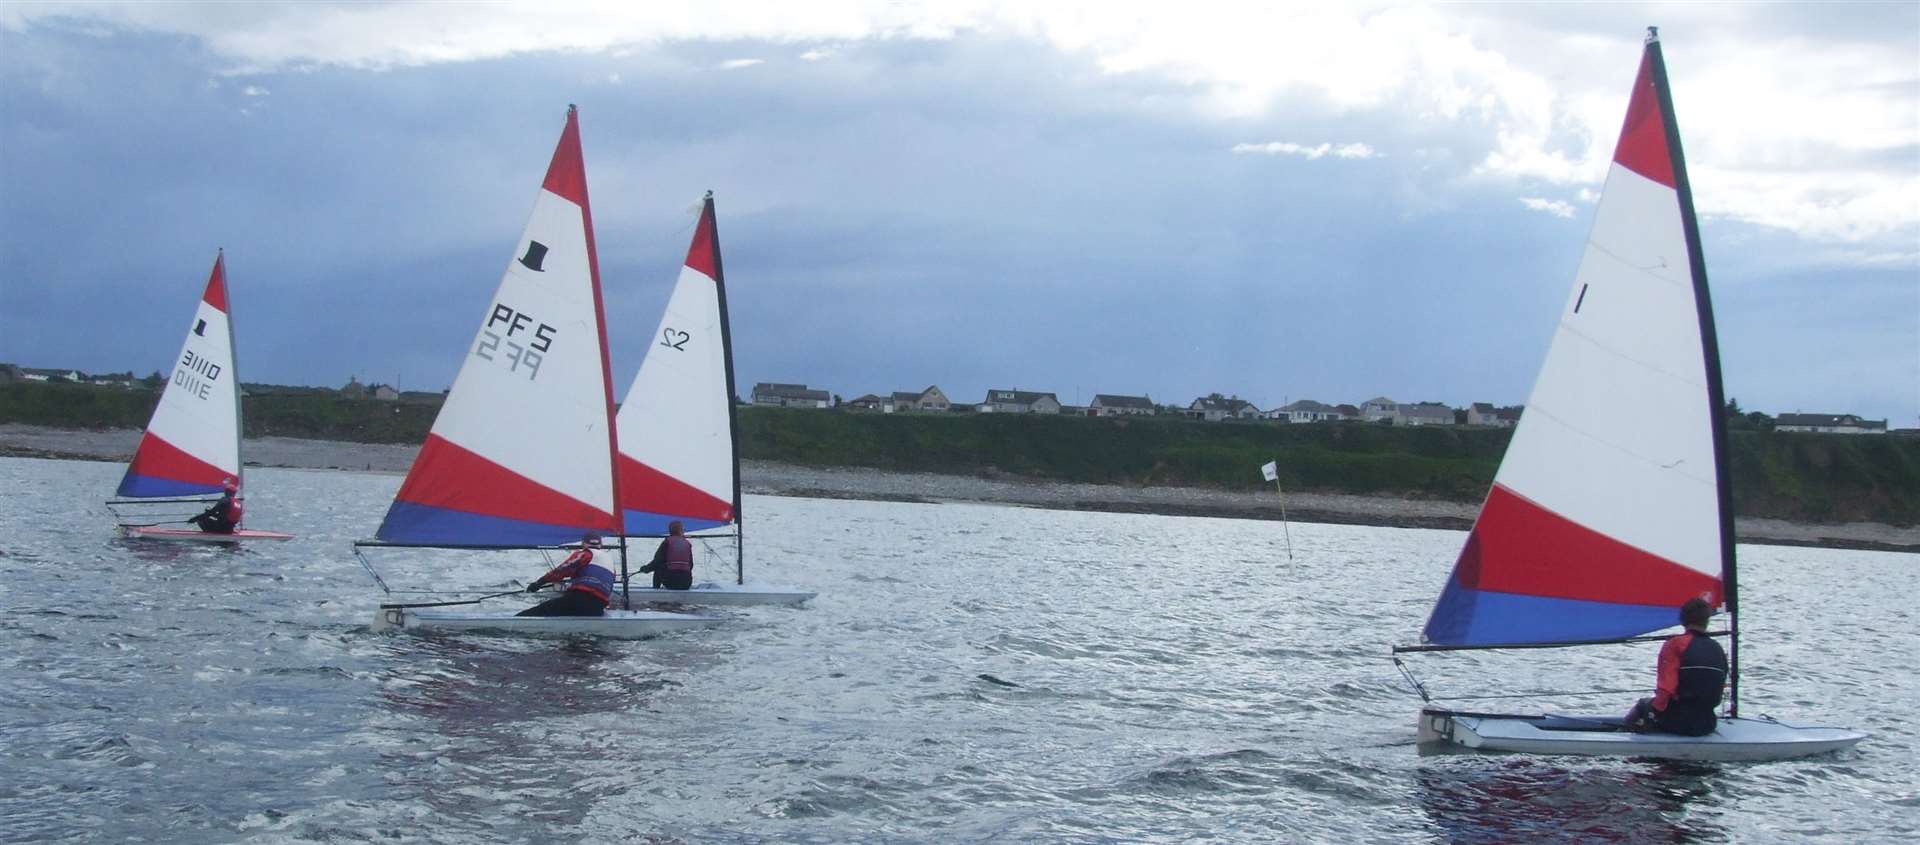 The race getting under way with the four Topper dinghies making their way across the start line.